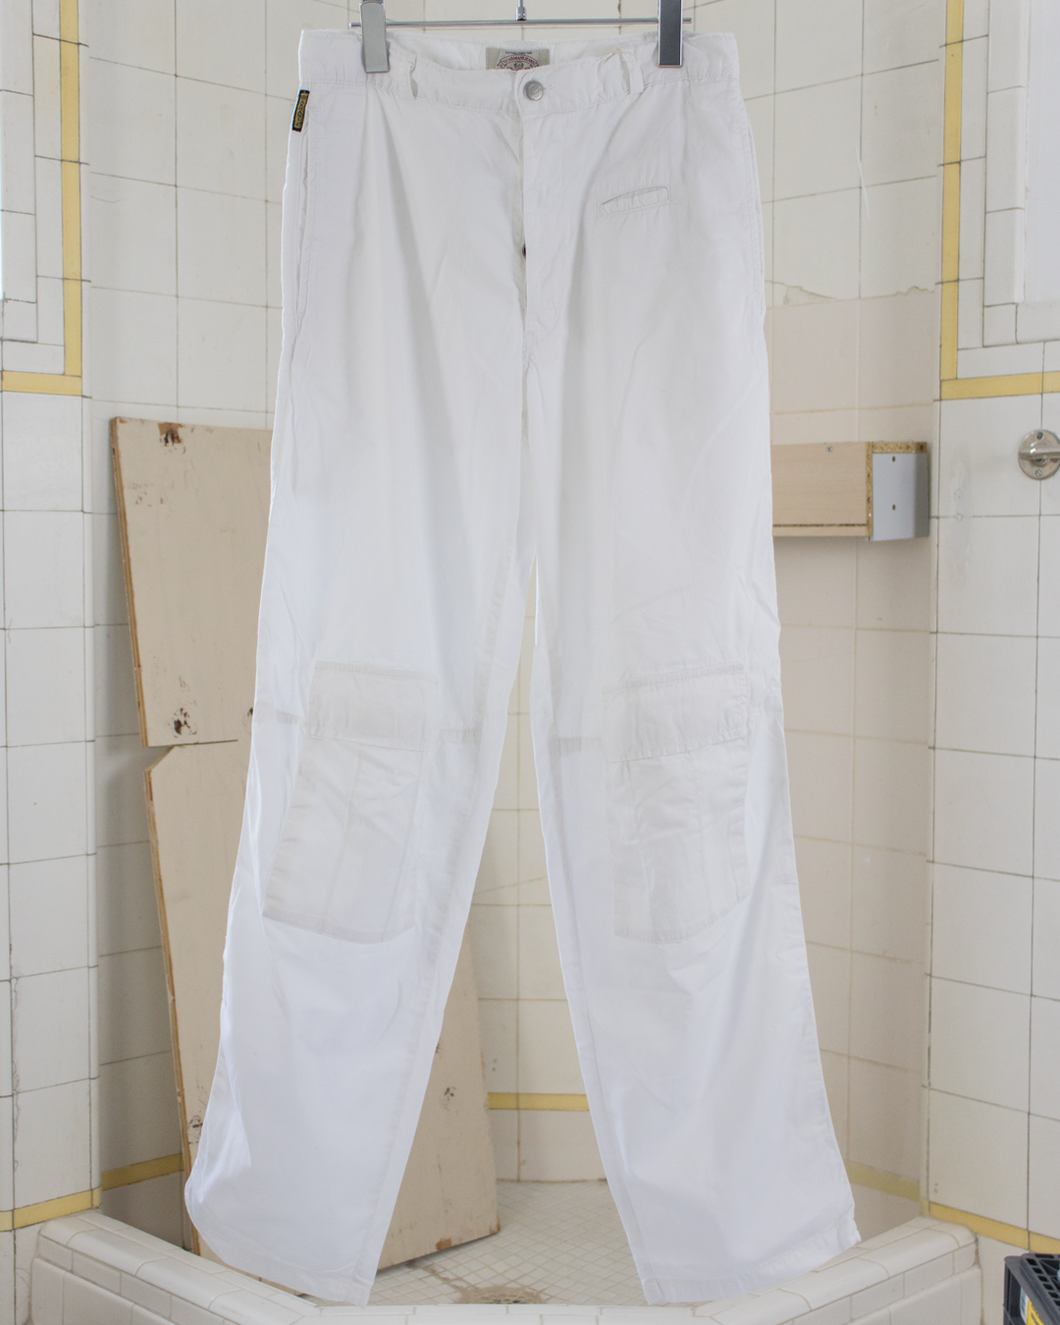 1990s Armani White Pants with Cargo Pockets on the Shin - Size S